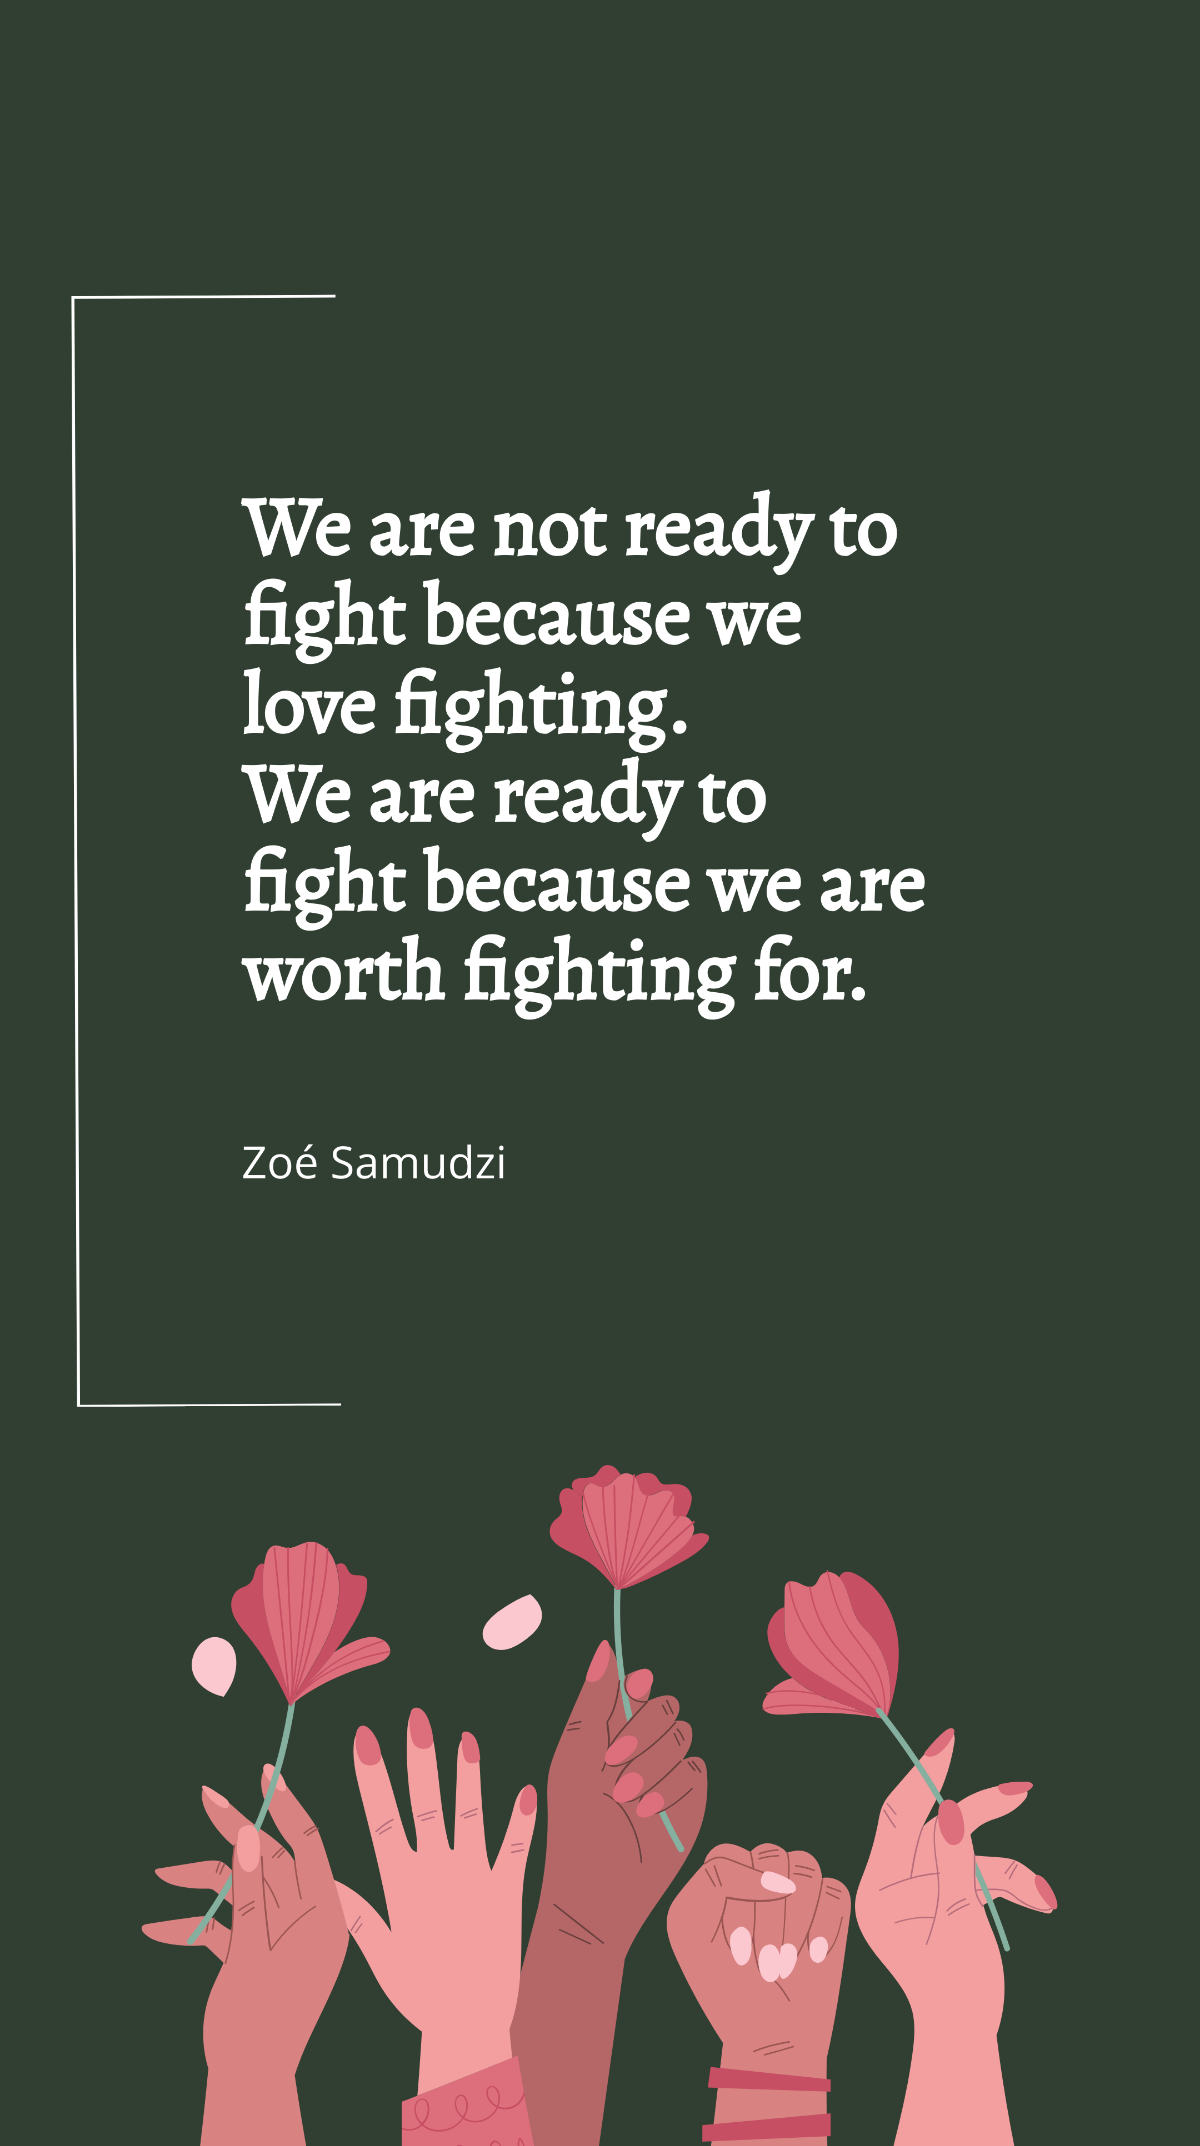 Zoé Samudzi - We are not ready to fight because we love fighting. We are ready to fight because we are worth fighting for. Template